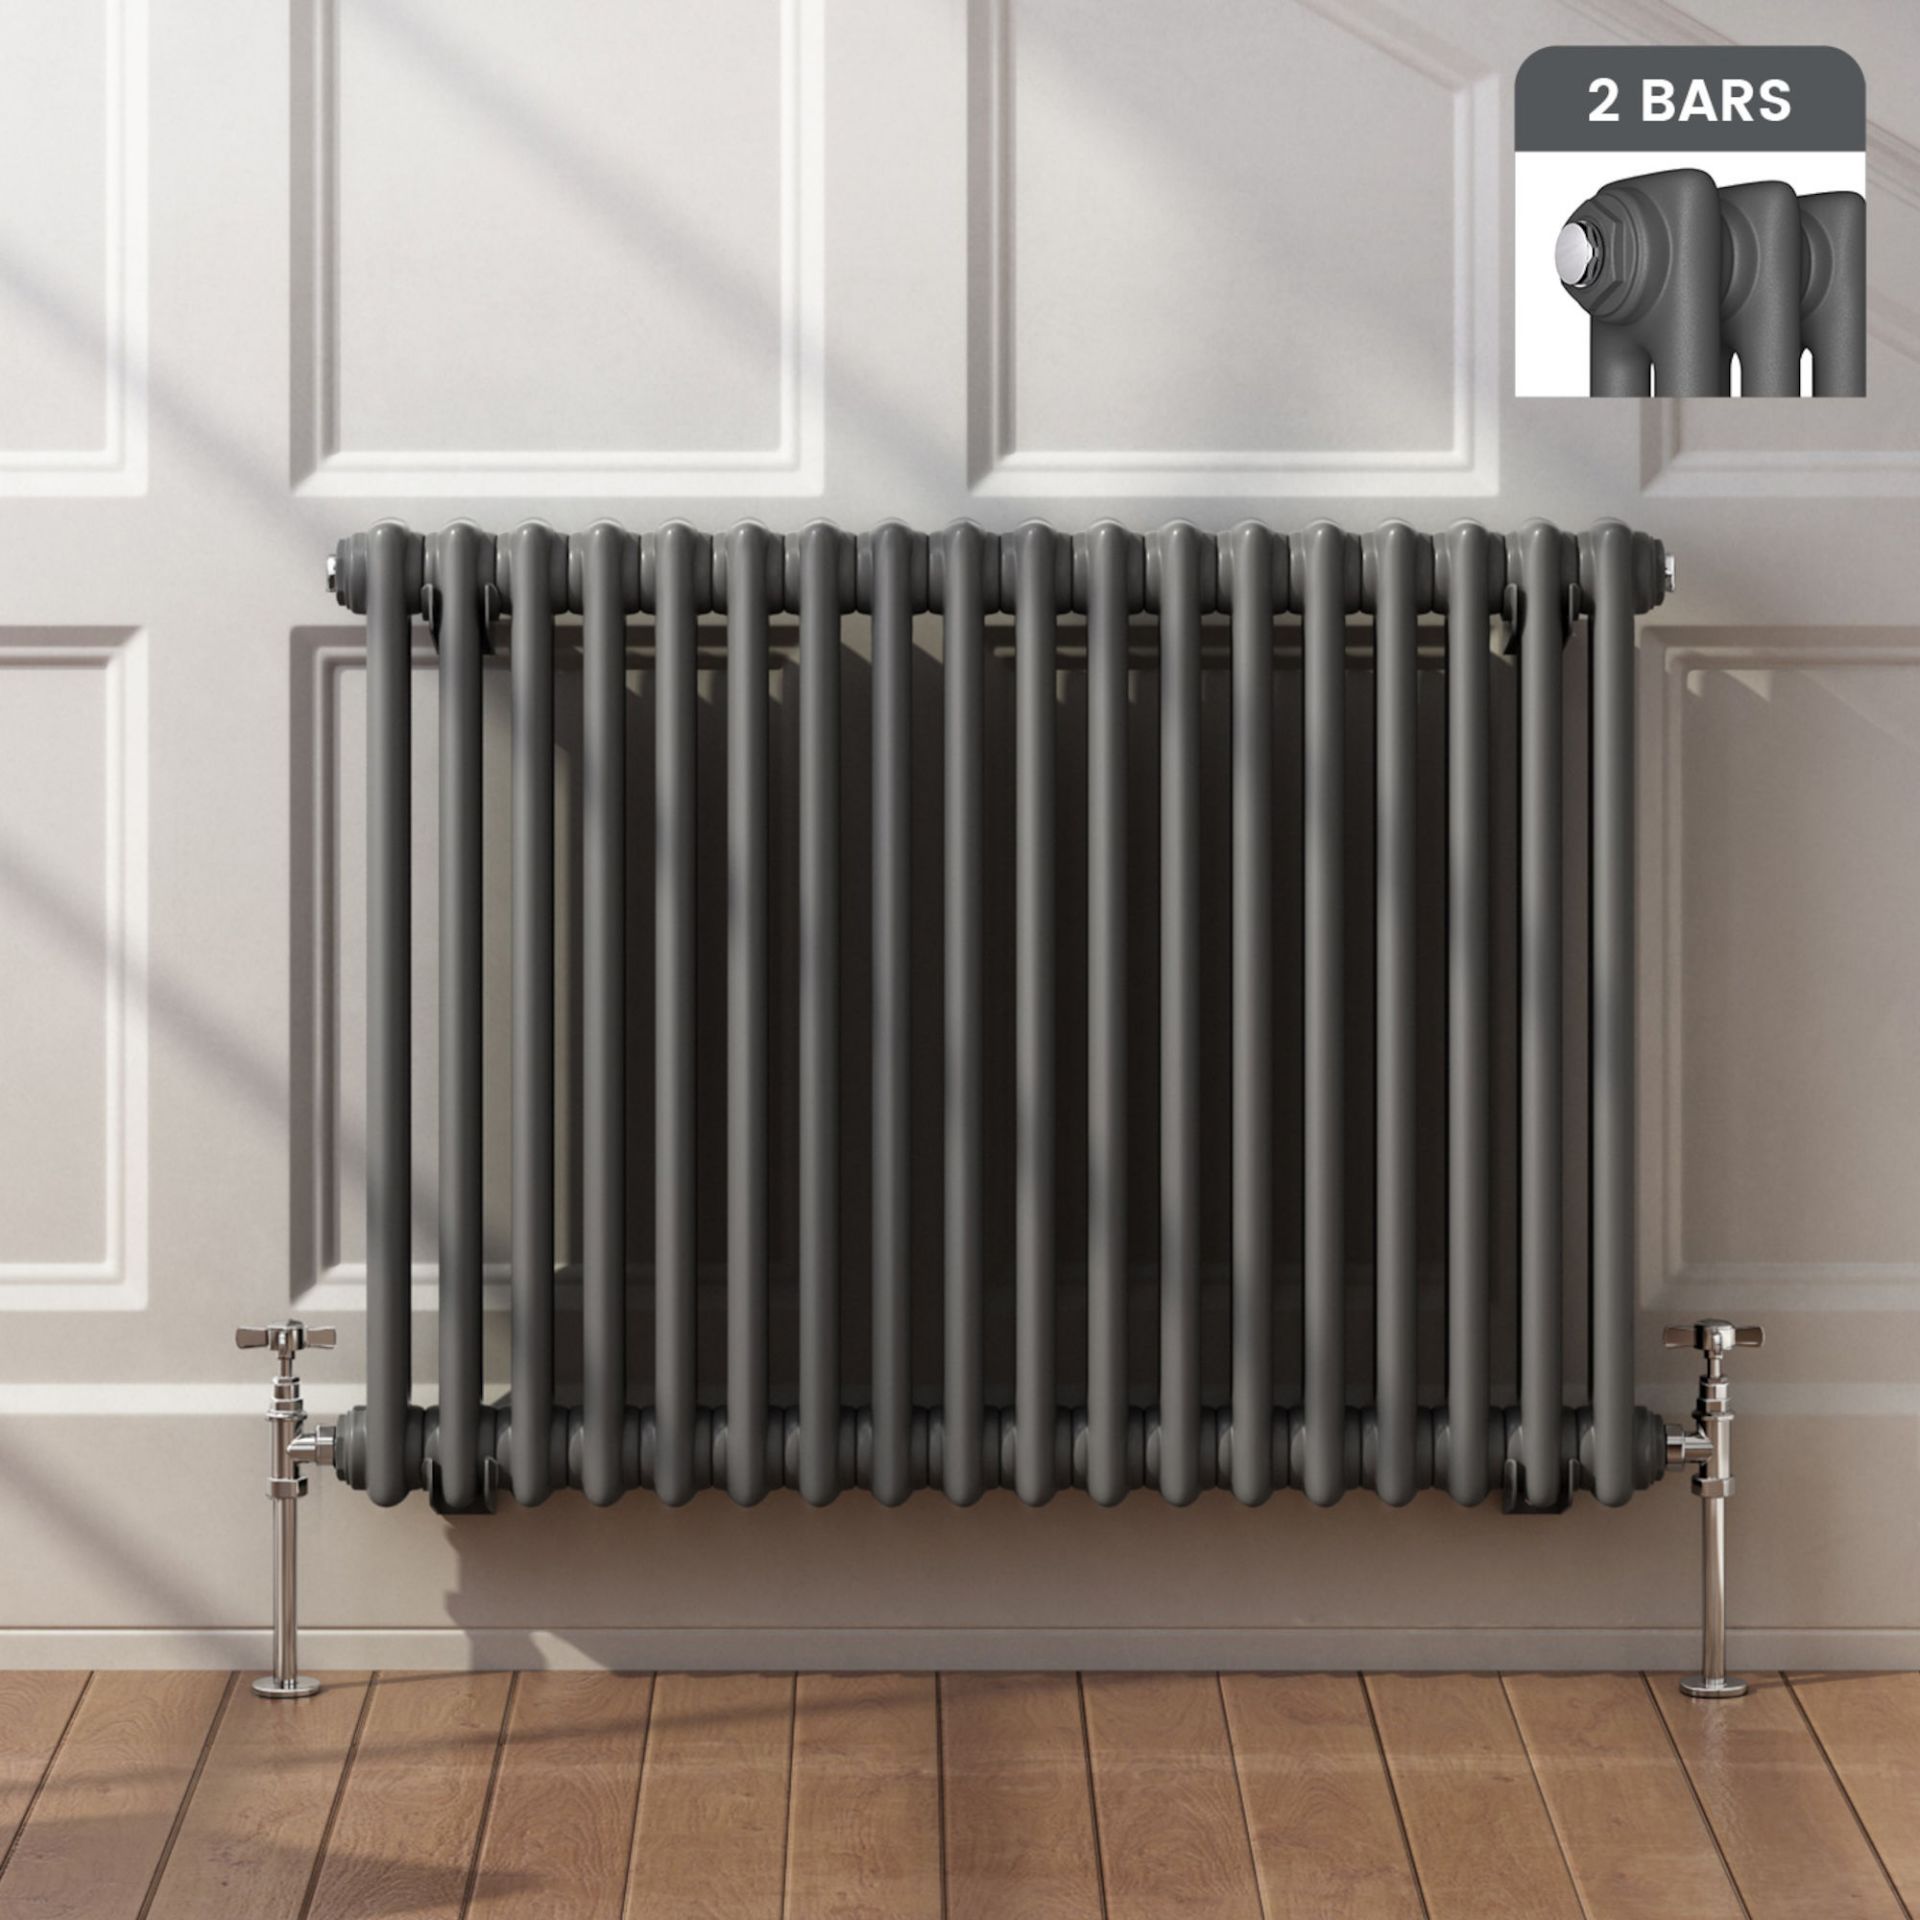 (EY212) 600x828mm Anthracite Double Panel Horizontal Colosseum Traditional Radiator. RRP £439.99.